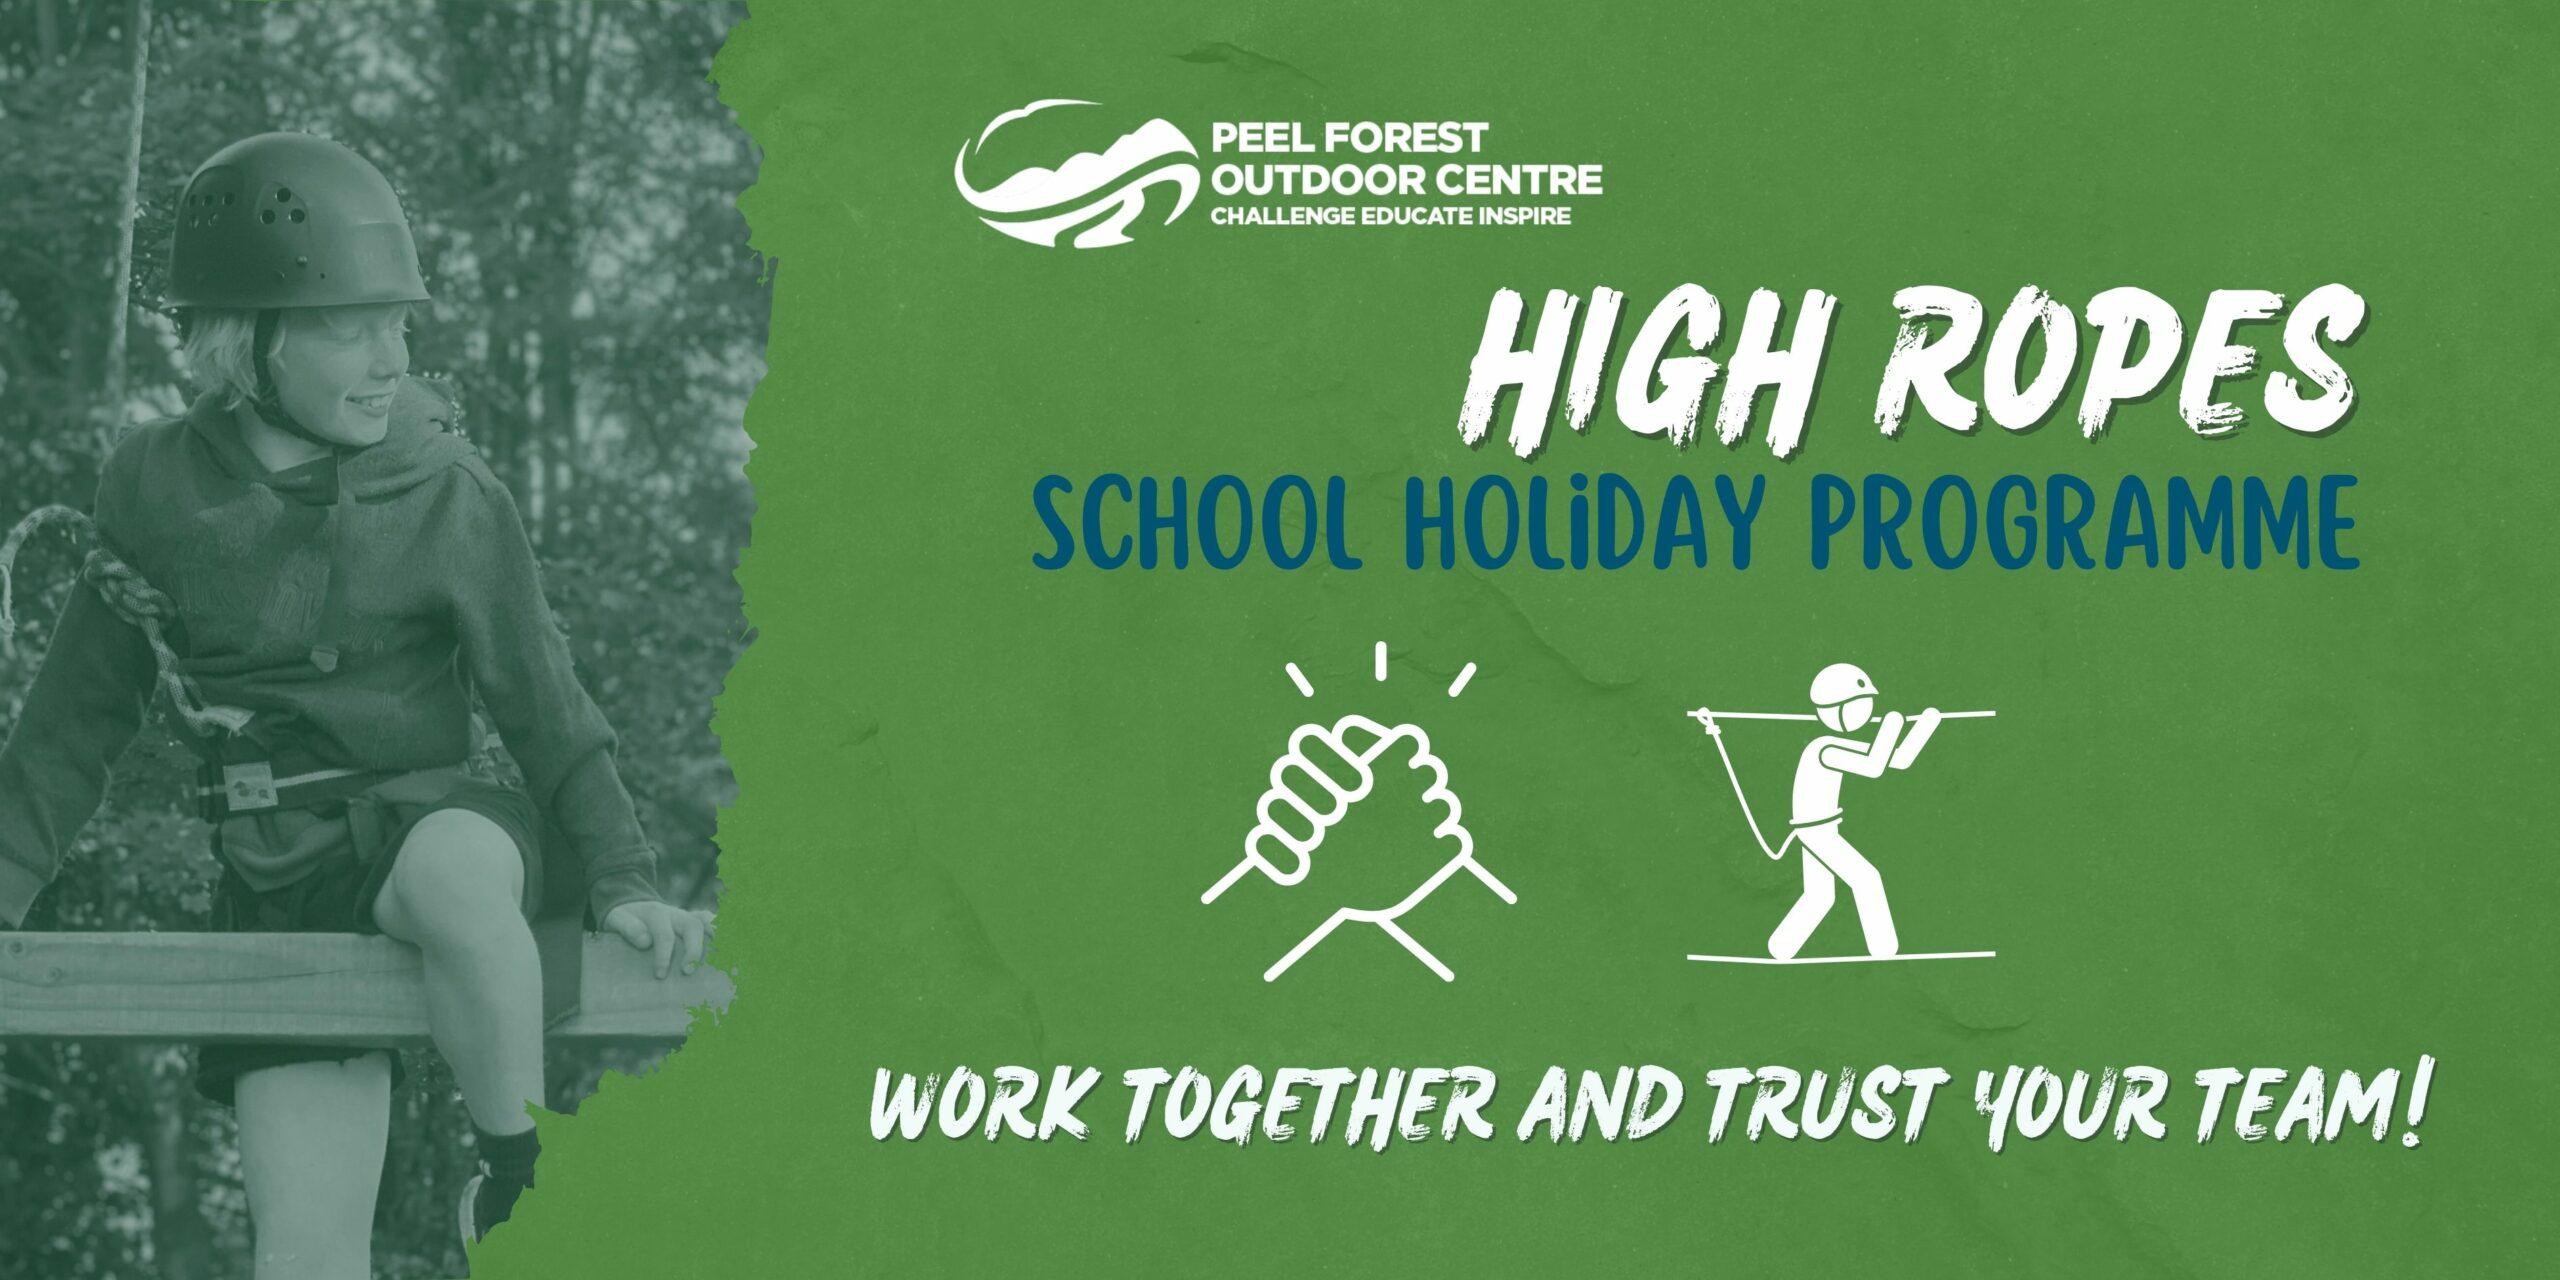 Holiday Programme - High Ropes Day